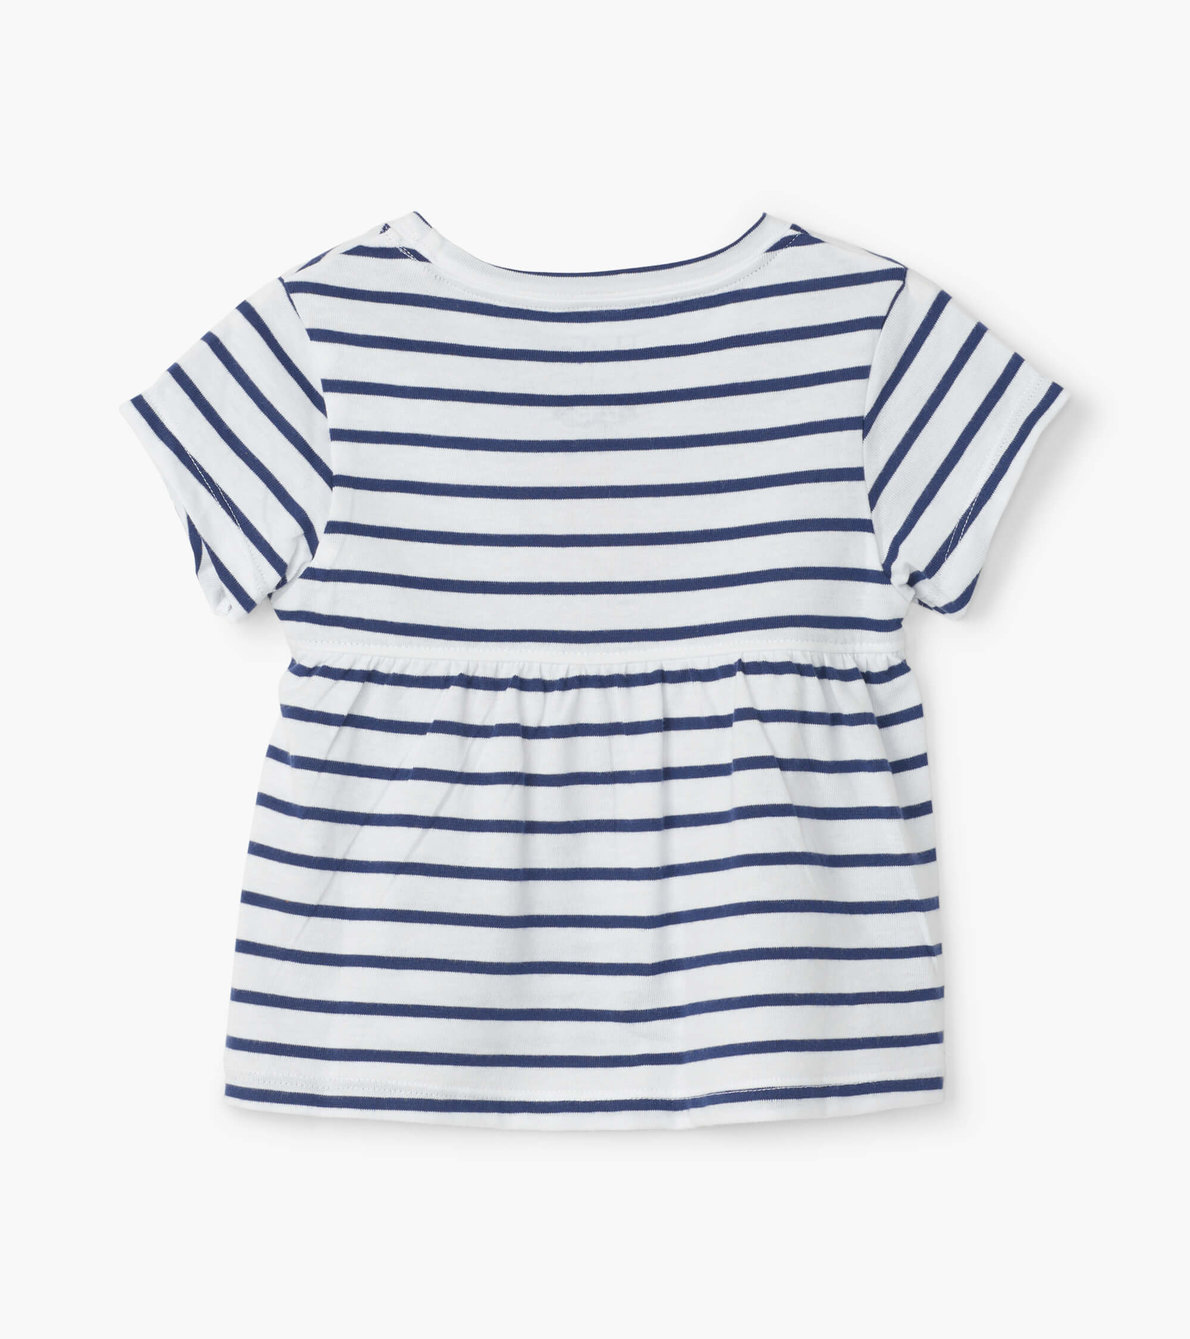 View larger image of Nautical Stripe Baby Tee